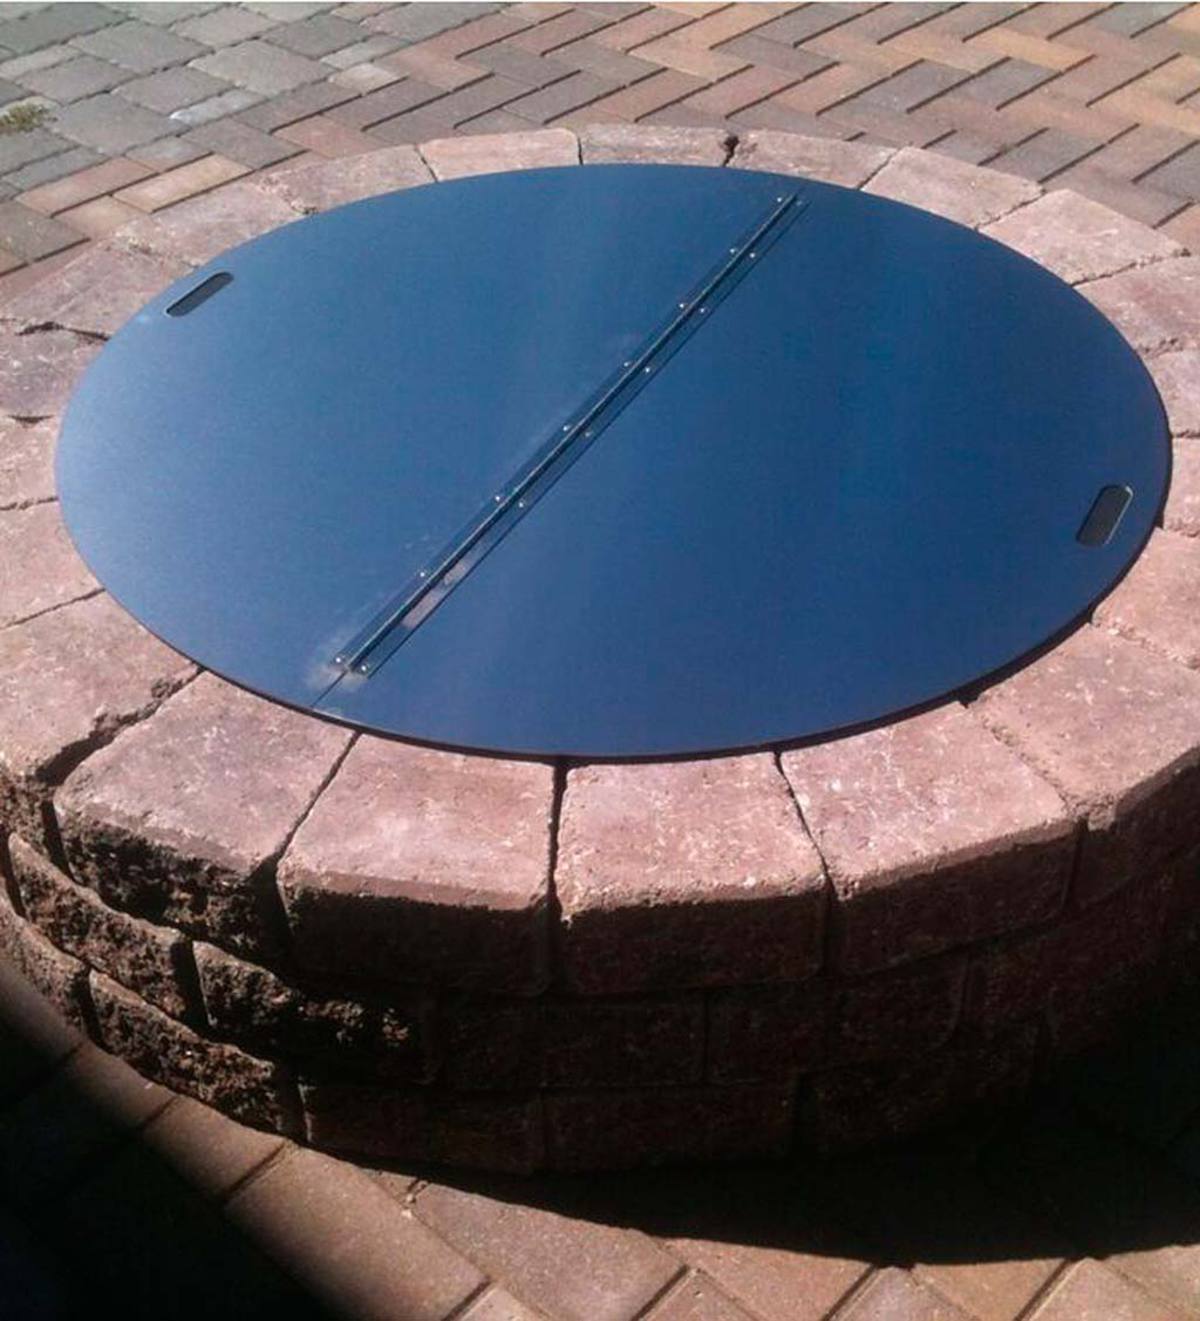 Stainless Steel Round Fire Pit Cover, Round Steel Fire Pit Cover Snuffer